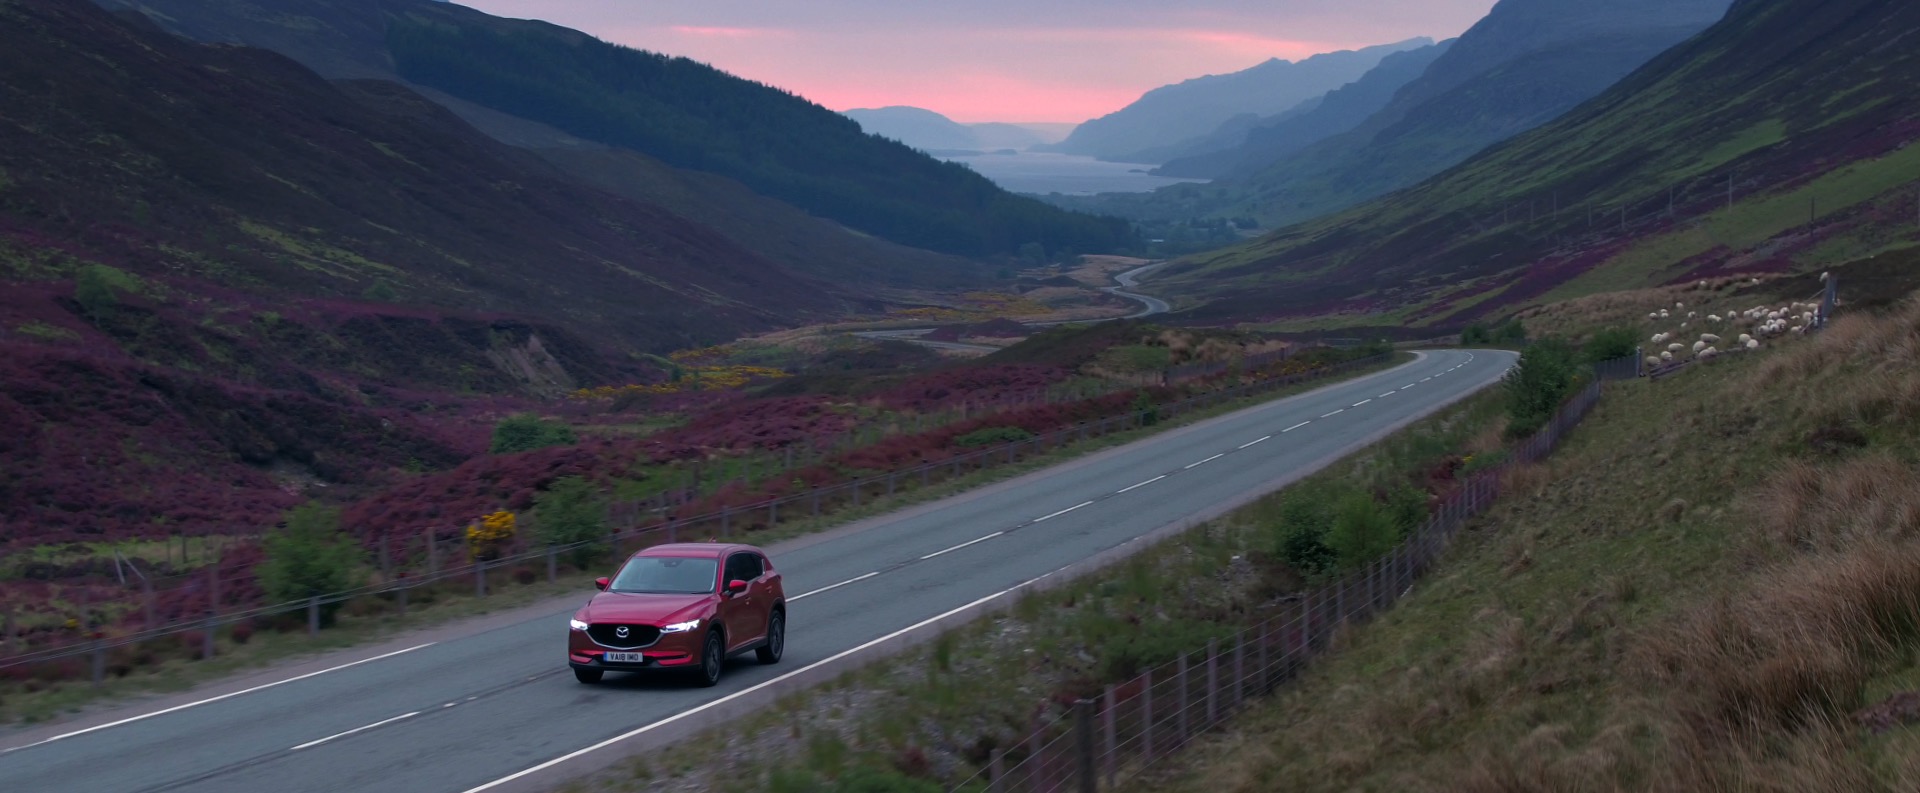 LS Productions Secures Stunning Scottish Route in Seamless Co-Production for Mazda's Latest Models